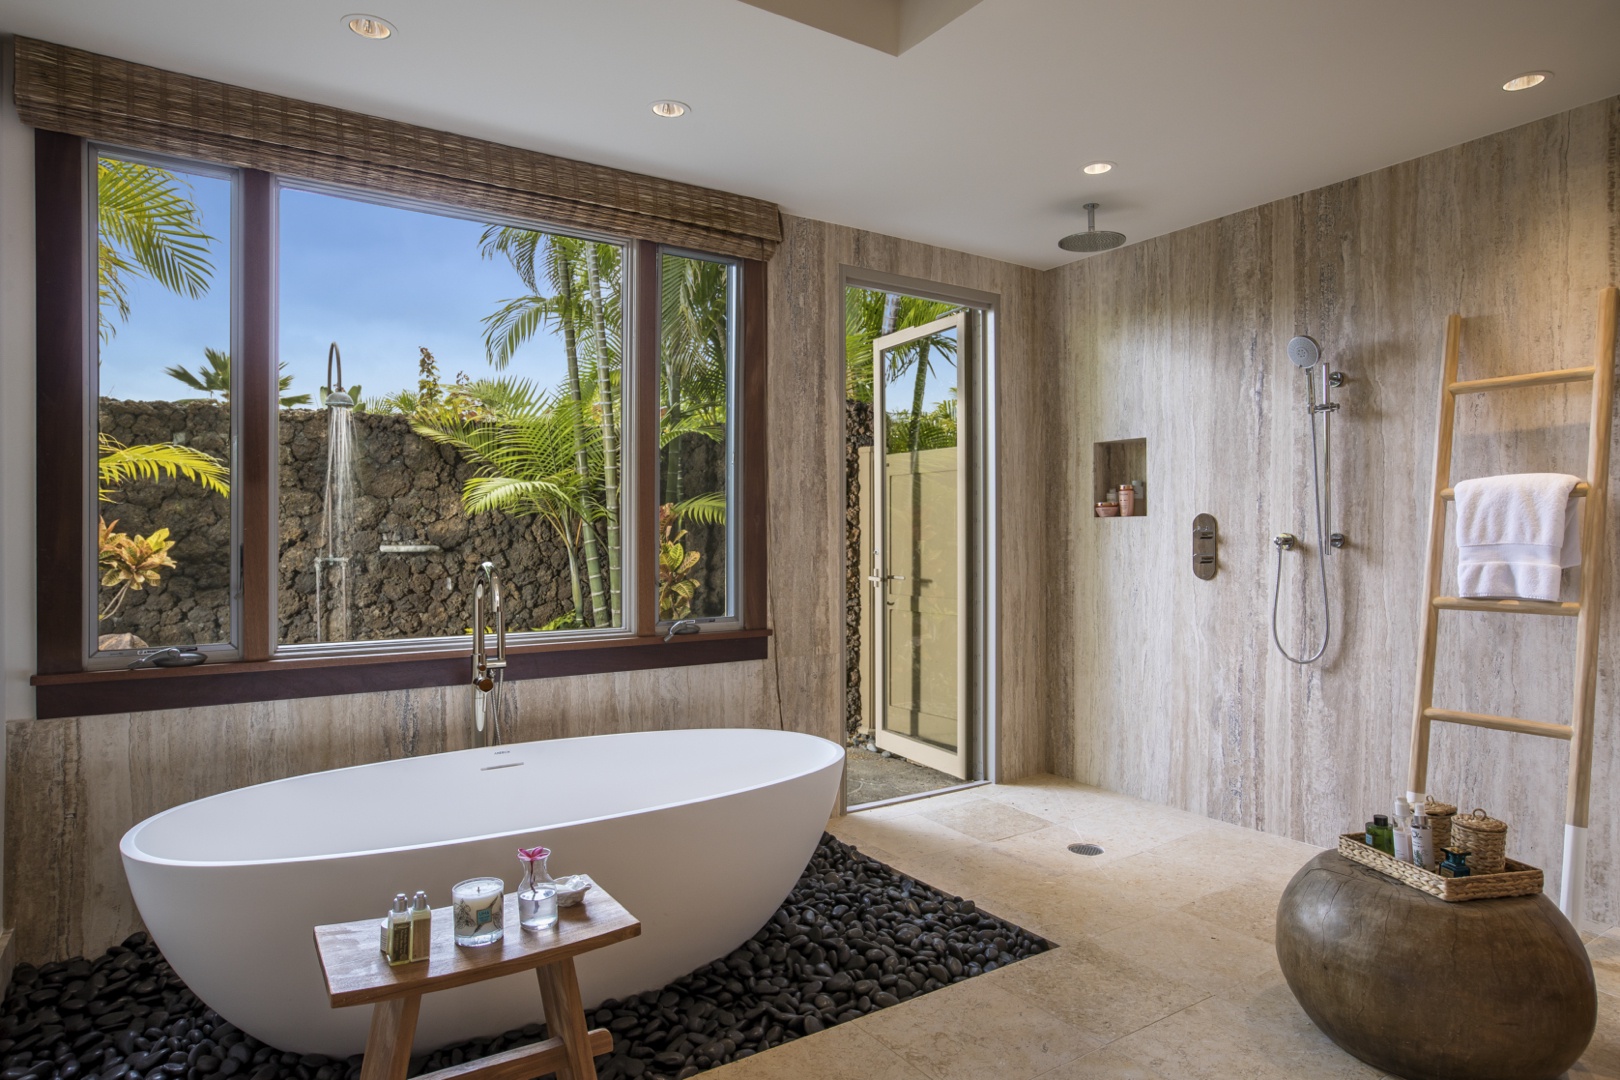 Kailua Kona Vacation Rentals, 4BD Kahikole Street (218) Estate Home at Four Seasons Resort at Hualalai - Primary bathroom with soaking tub floating on a bed of river rocks & rainfall walk-in shower